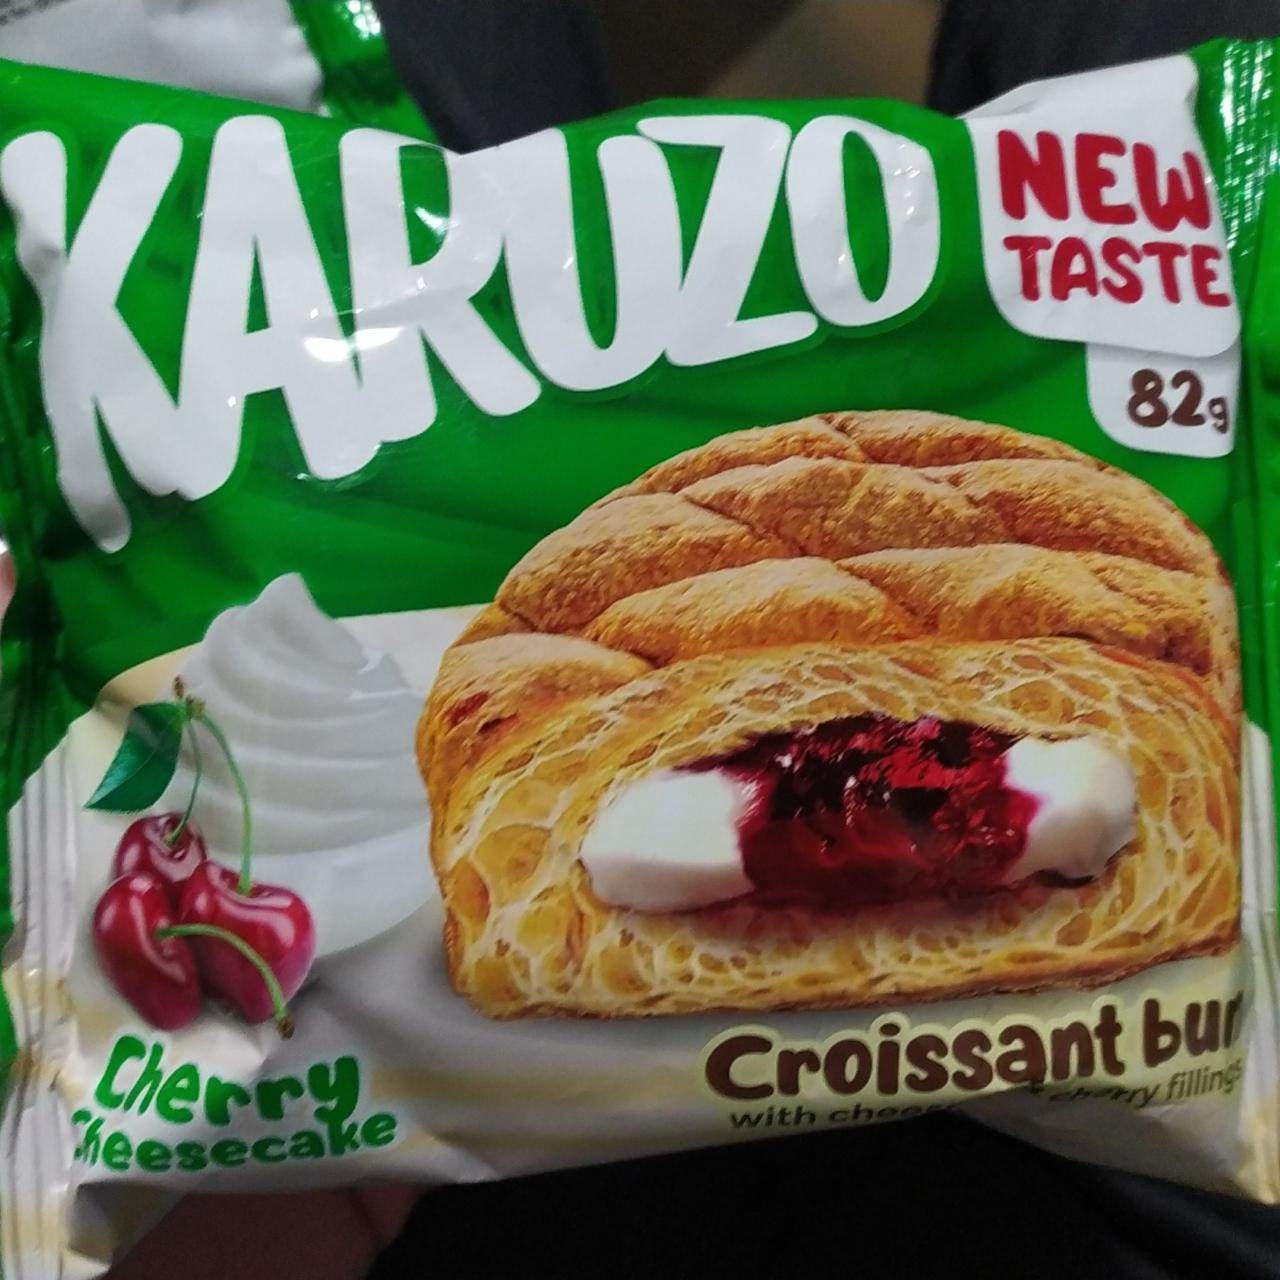 Fotografie - Cherry cheesecake Croissant bun with cheese and cherry fillings Karuzo